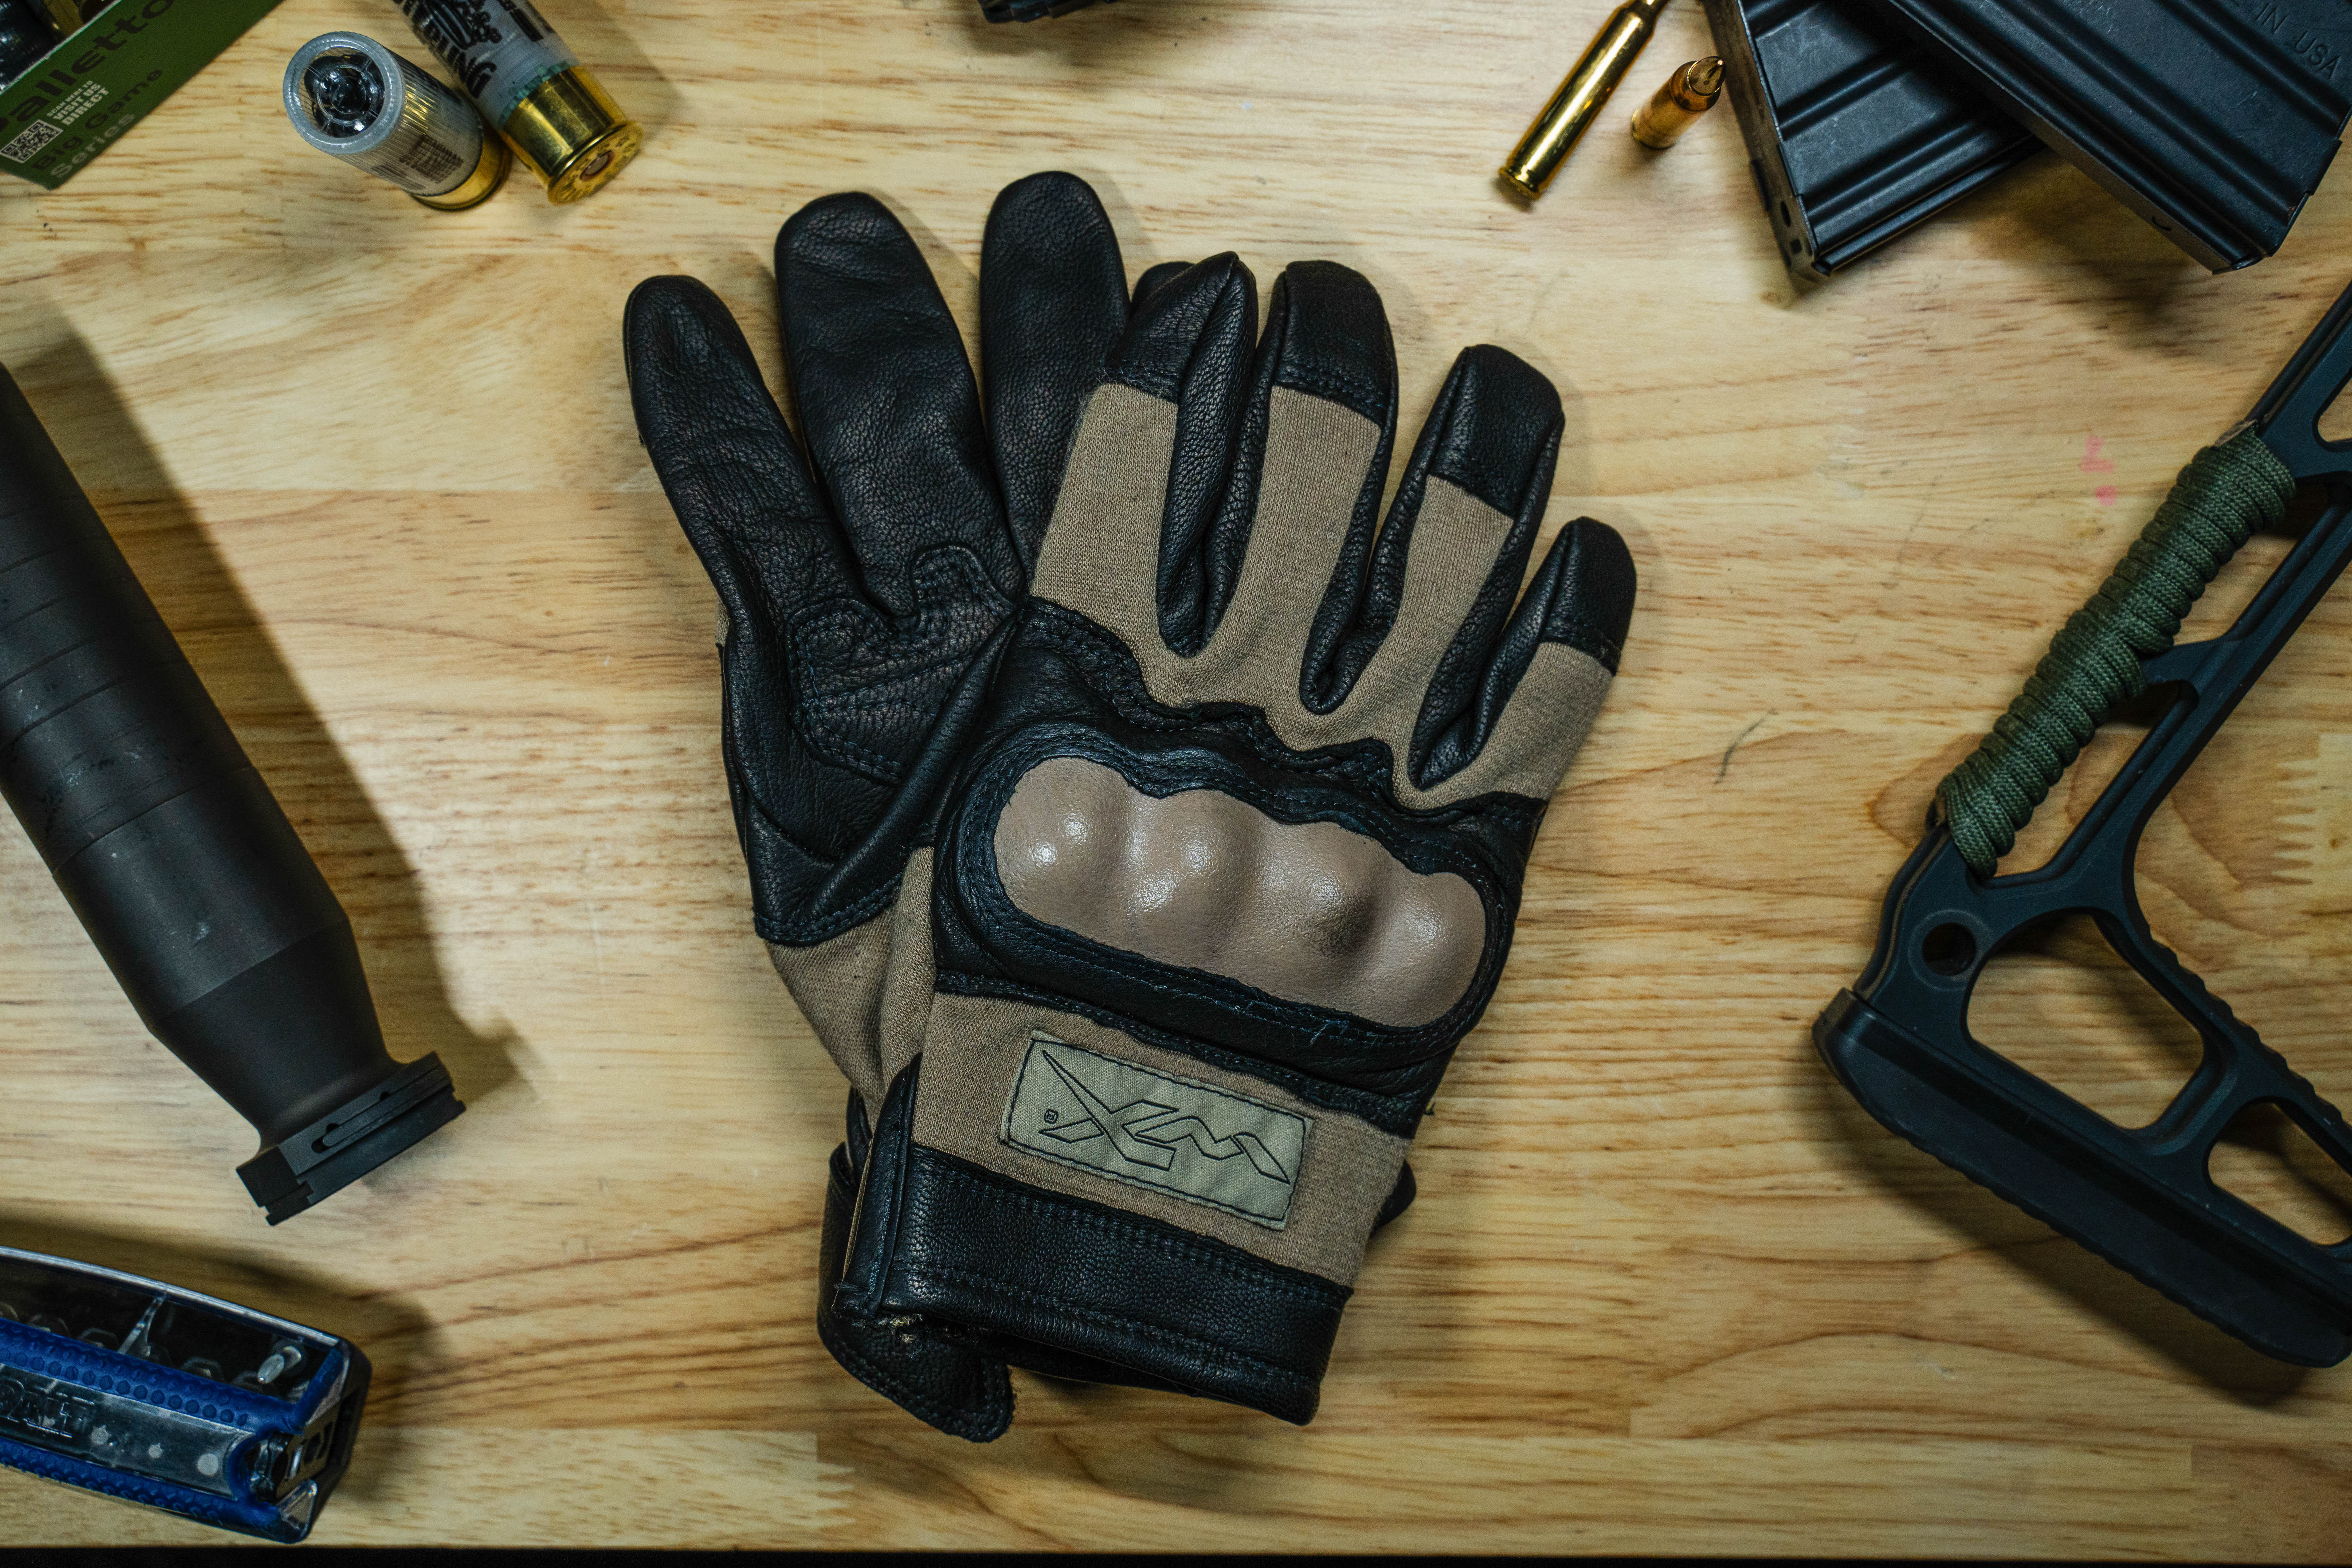 Wiley X Cag 1 gloves